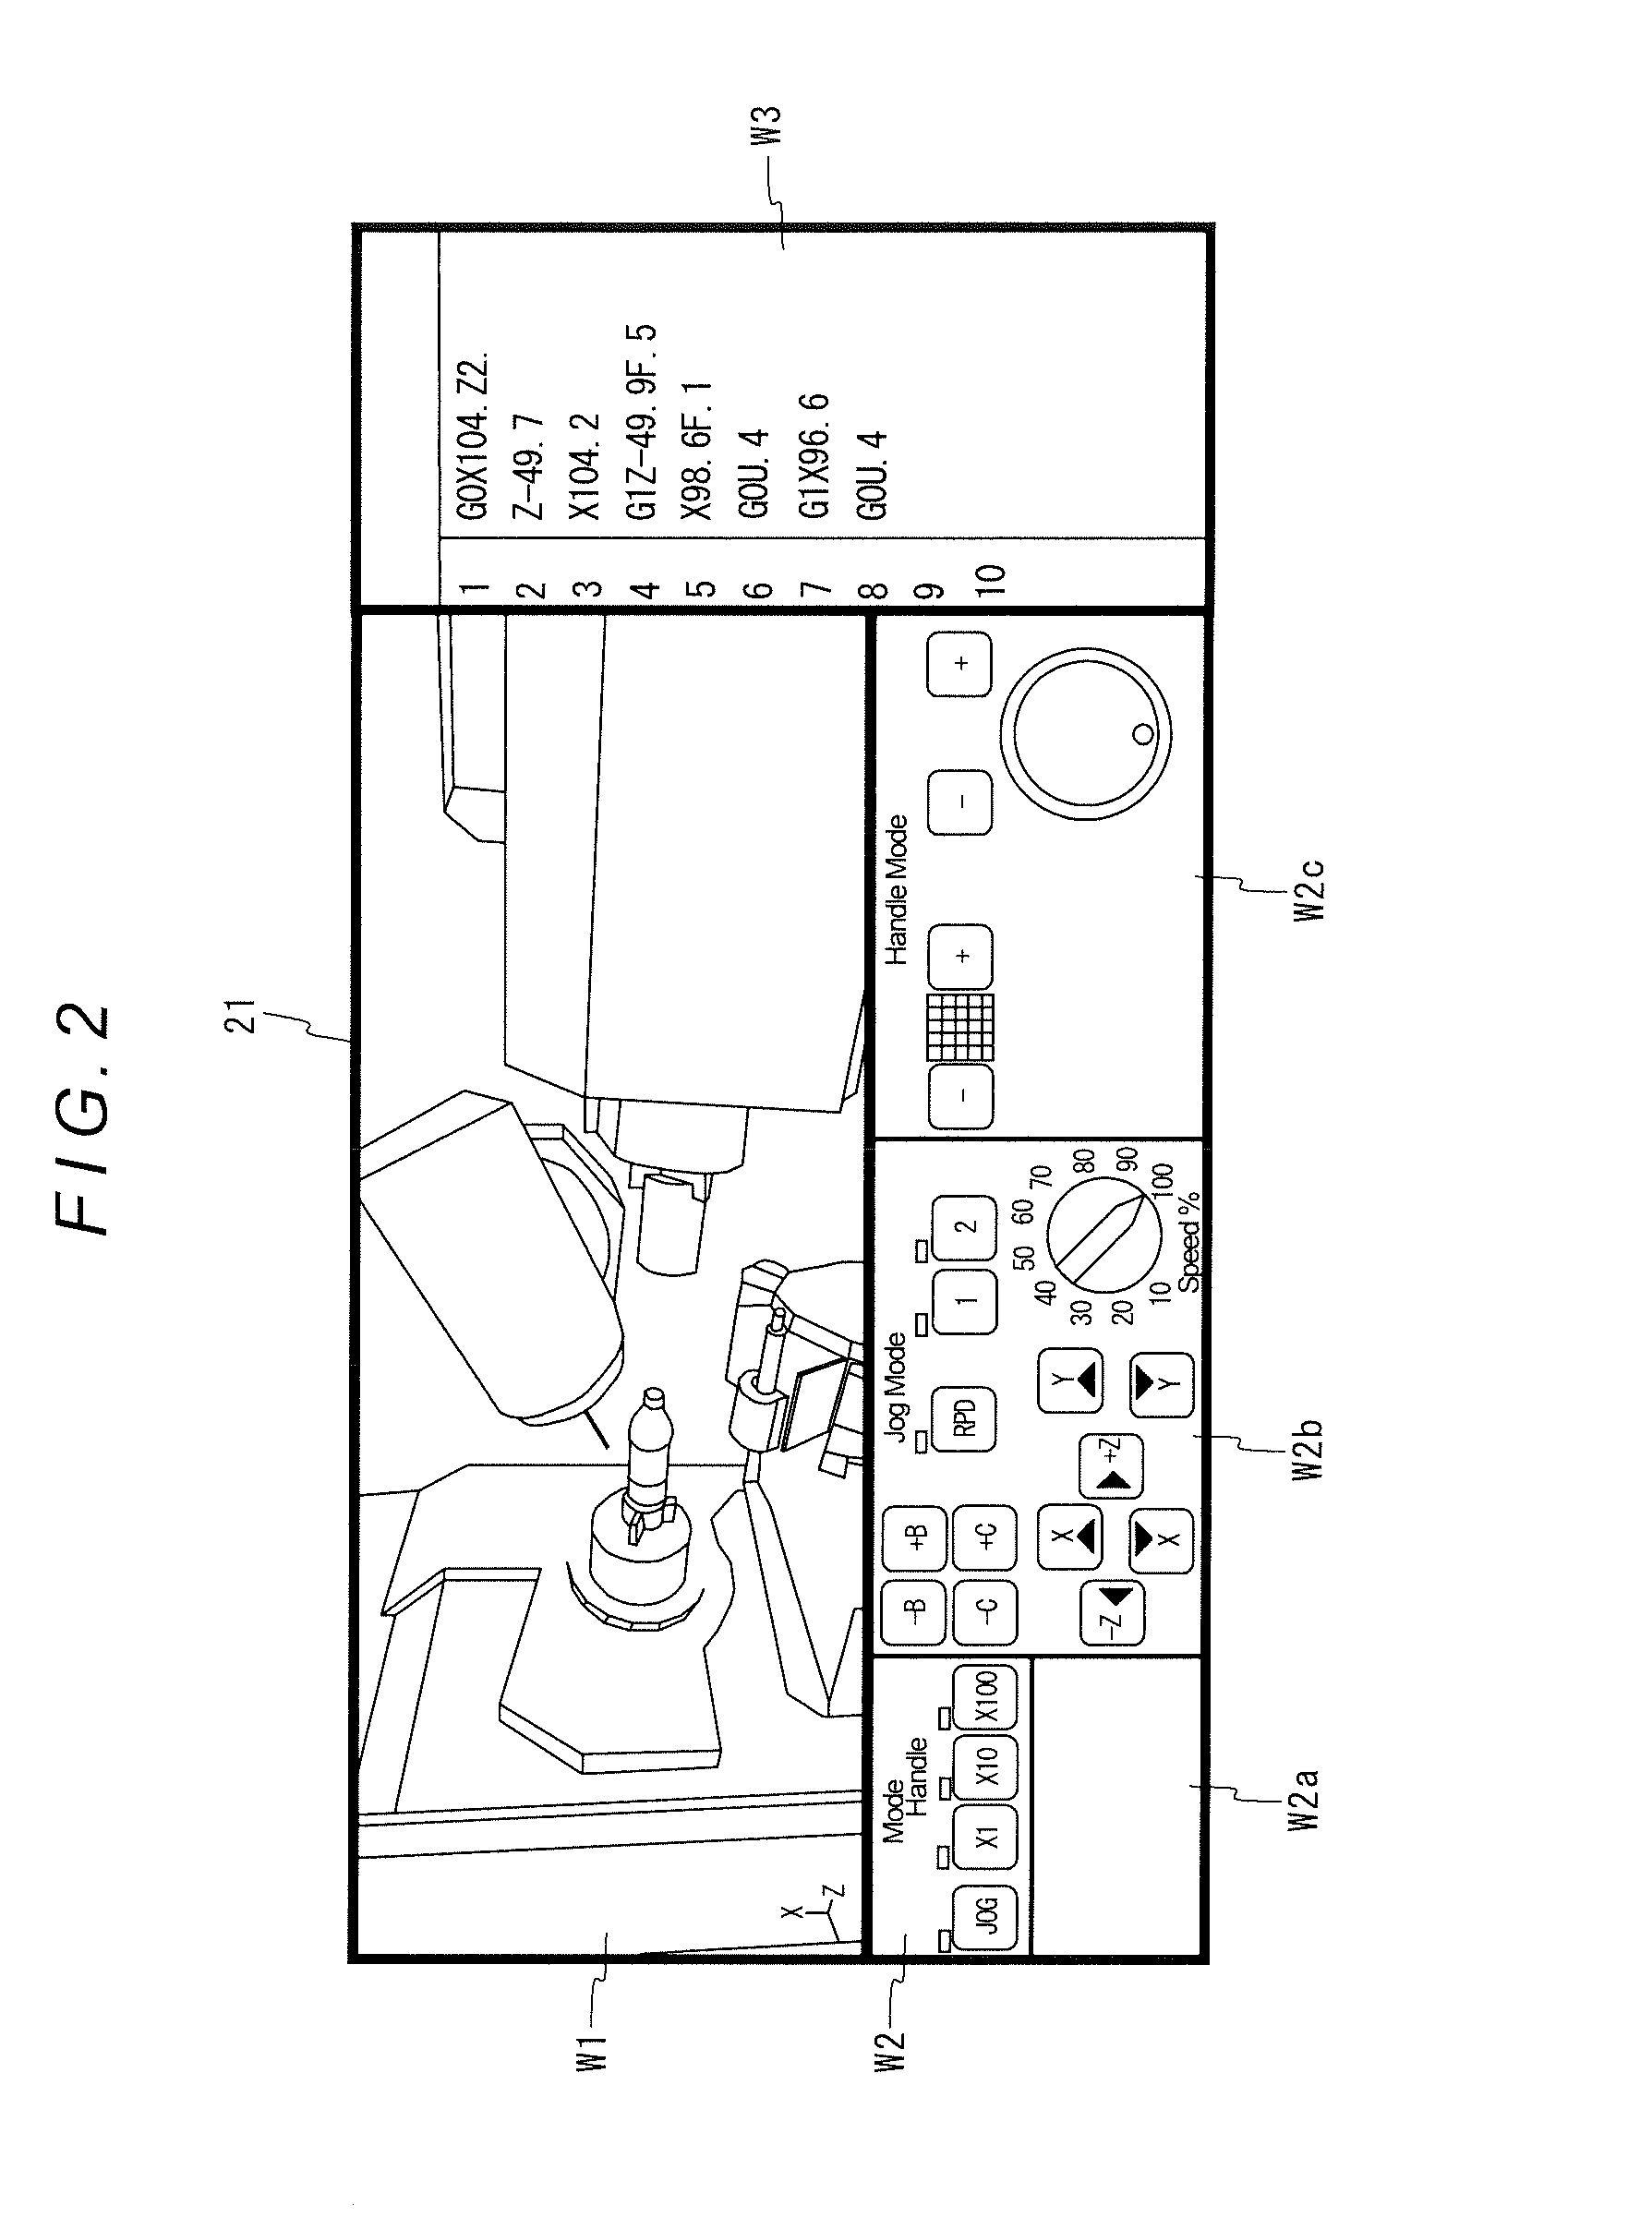 Simulation Apparatus for Manual Operation of Machine Tool